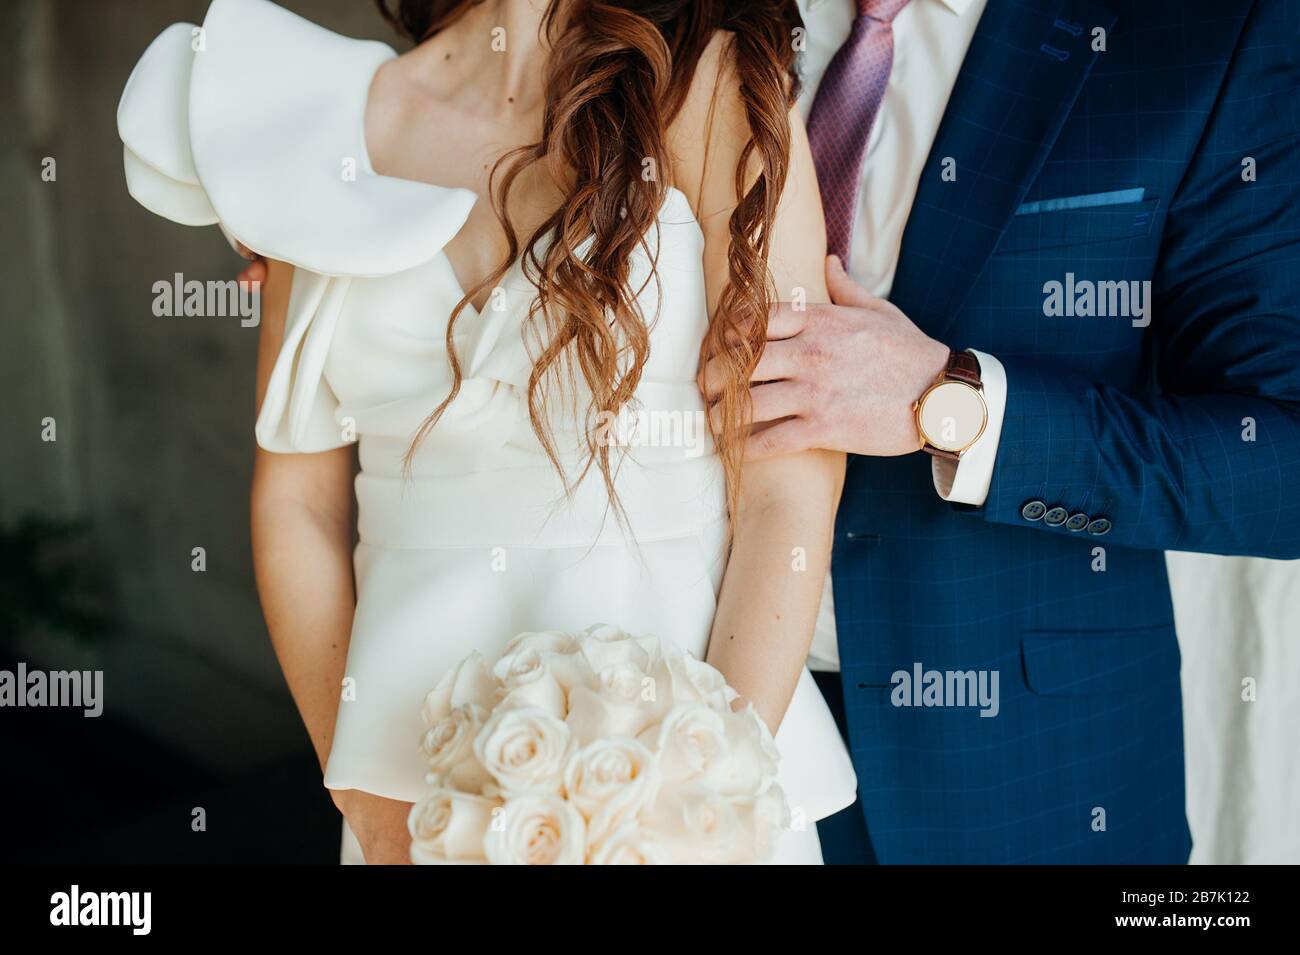 Stylish wedding picture. The groom in a blue suit gently embraces the bride in a white stylish dress made of stiff fabric. Puffy wedding dress sleeve, Stock Photo